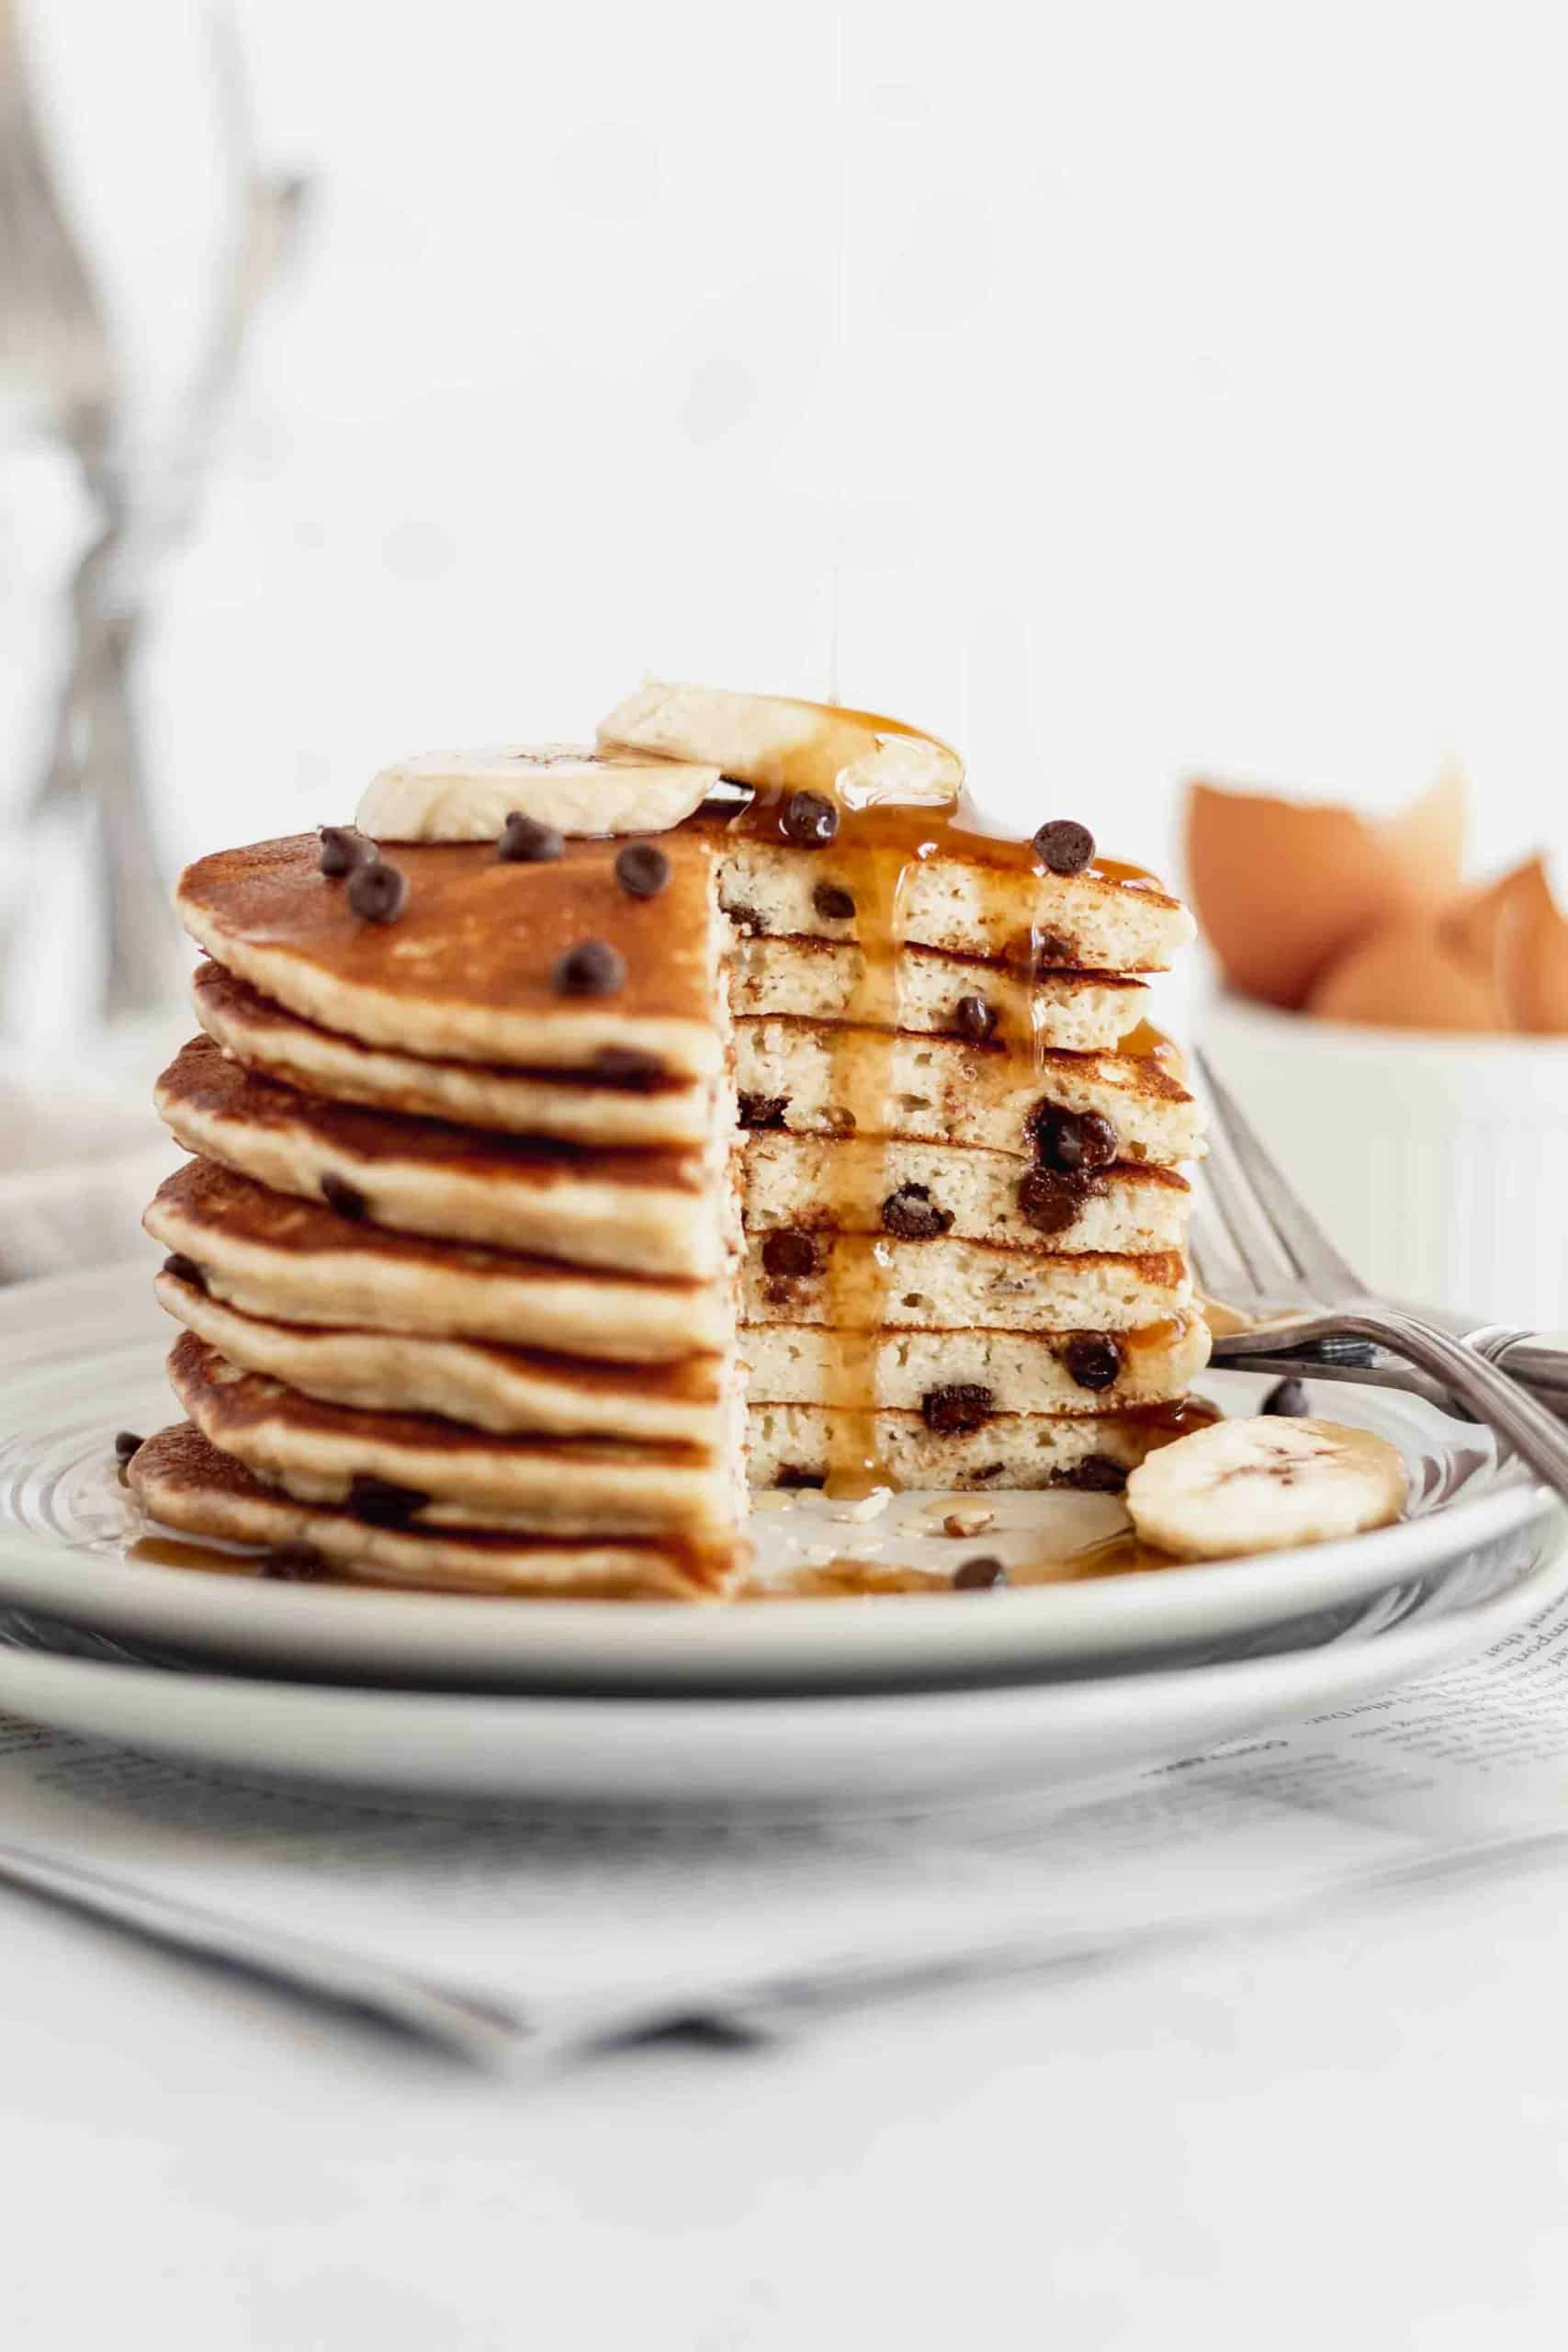 A stack of gluten free banana pancakes with chocolate chips, with maple syrup getting drizzled on.